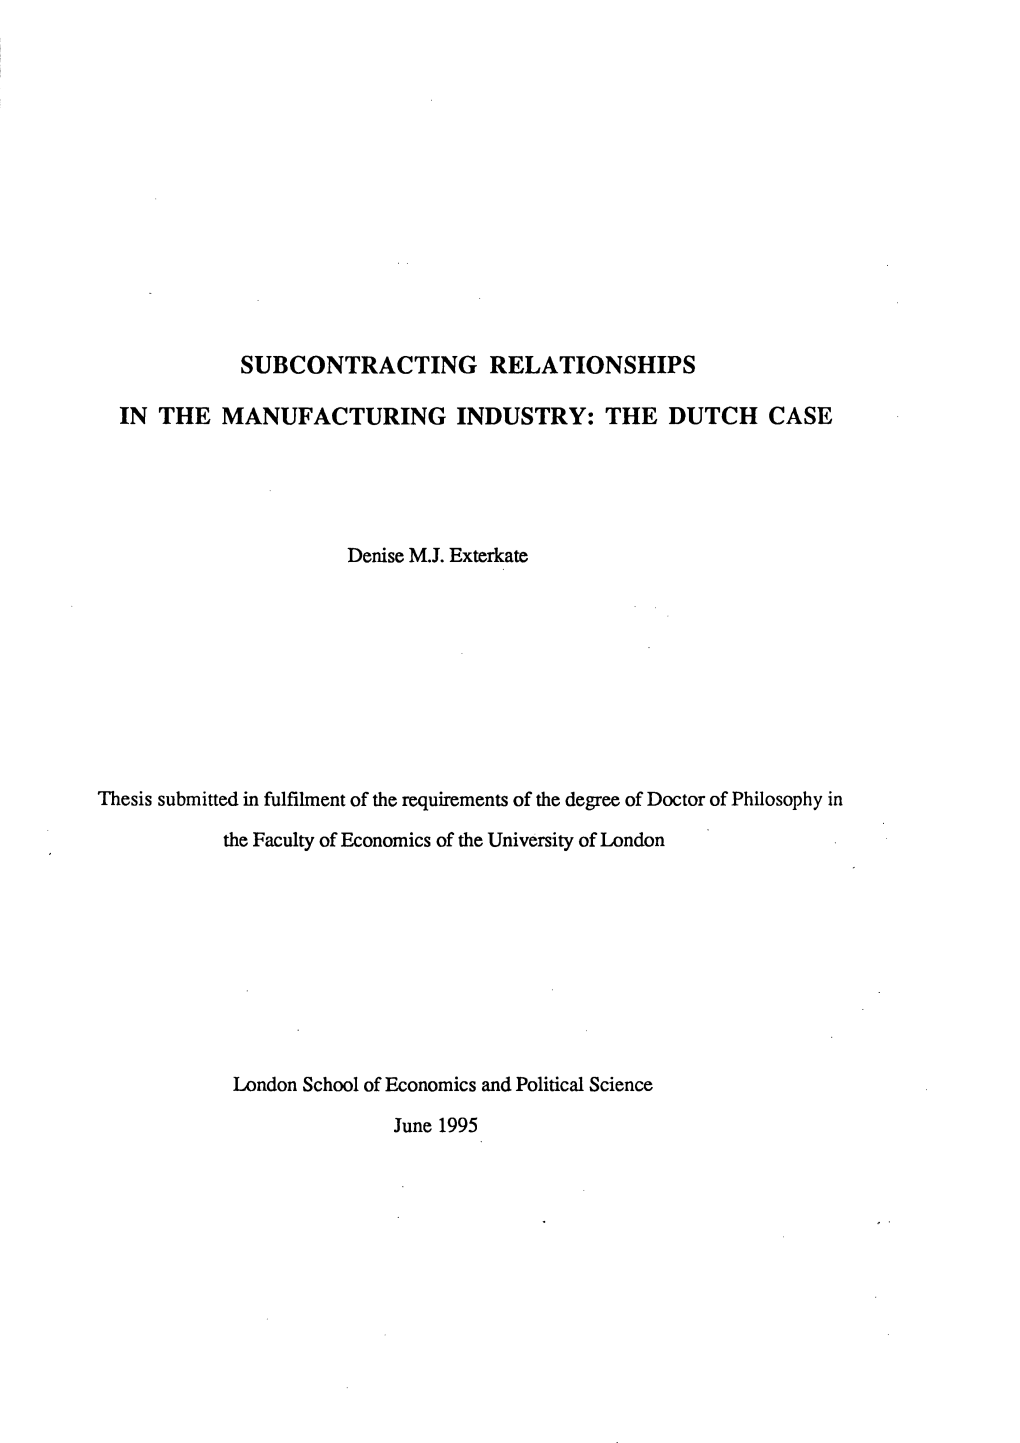 Subcontracting Relationships in the Dutch Manufacturing Industry, Which Is Characterized by a Predominance of Smes